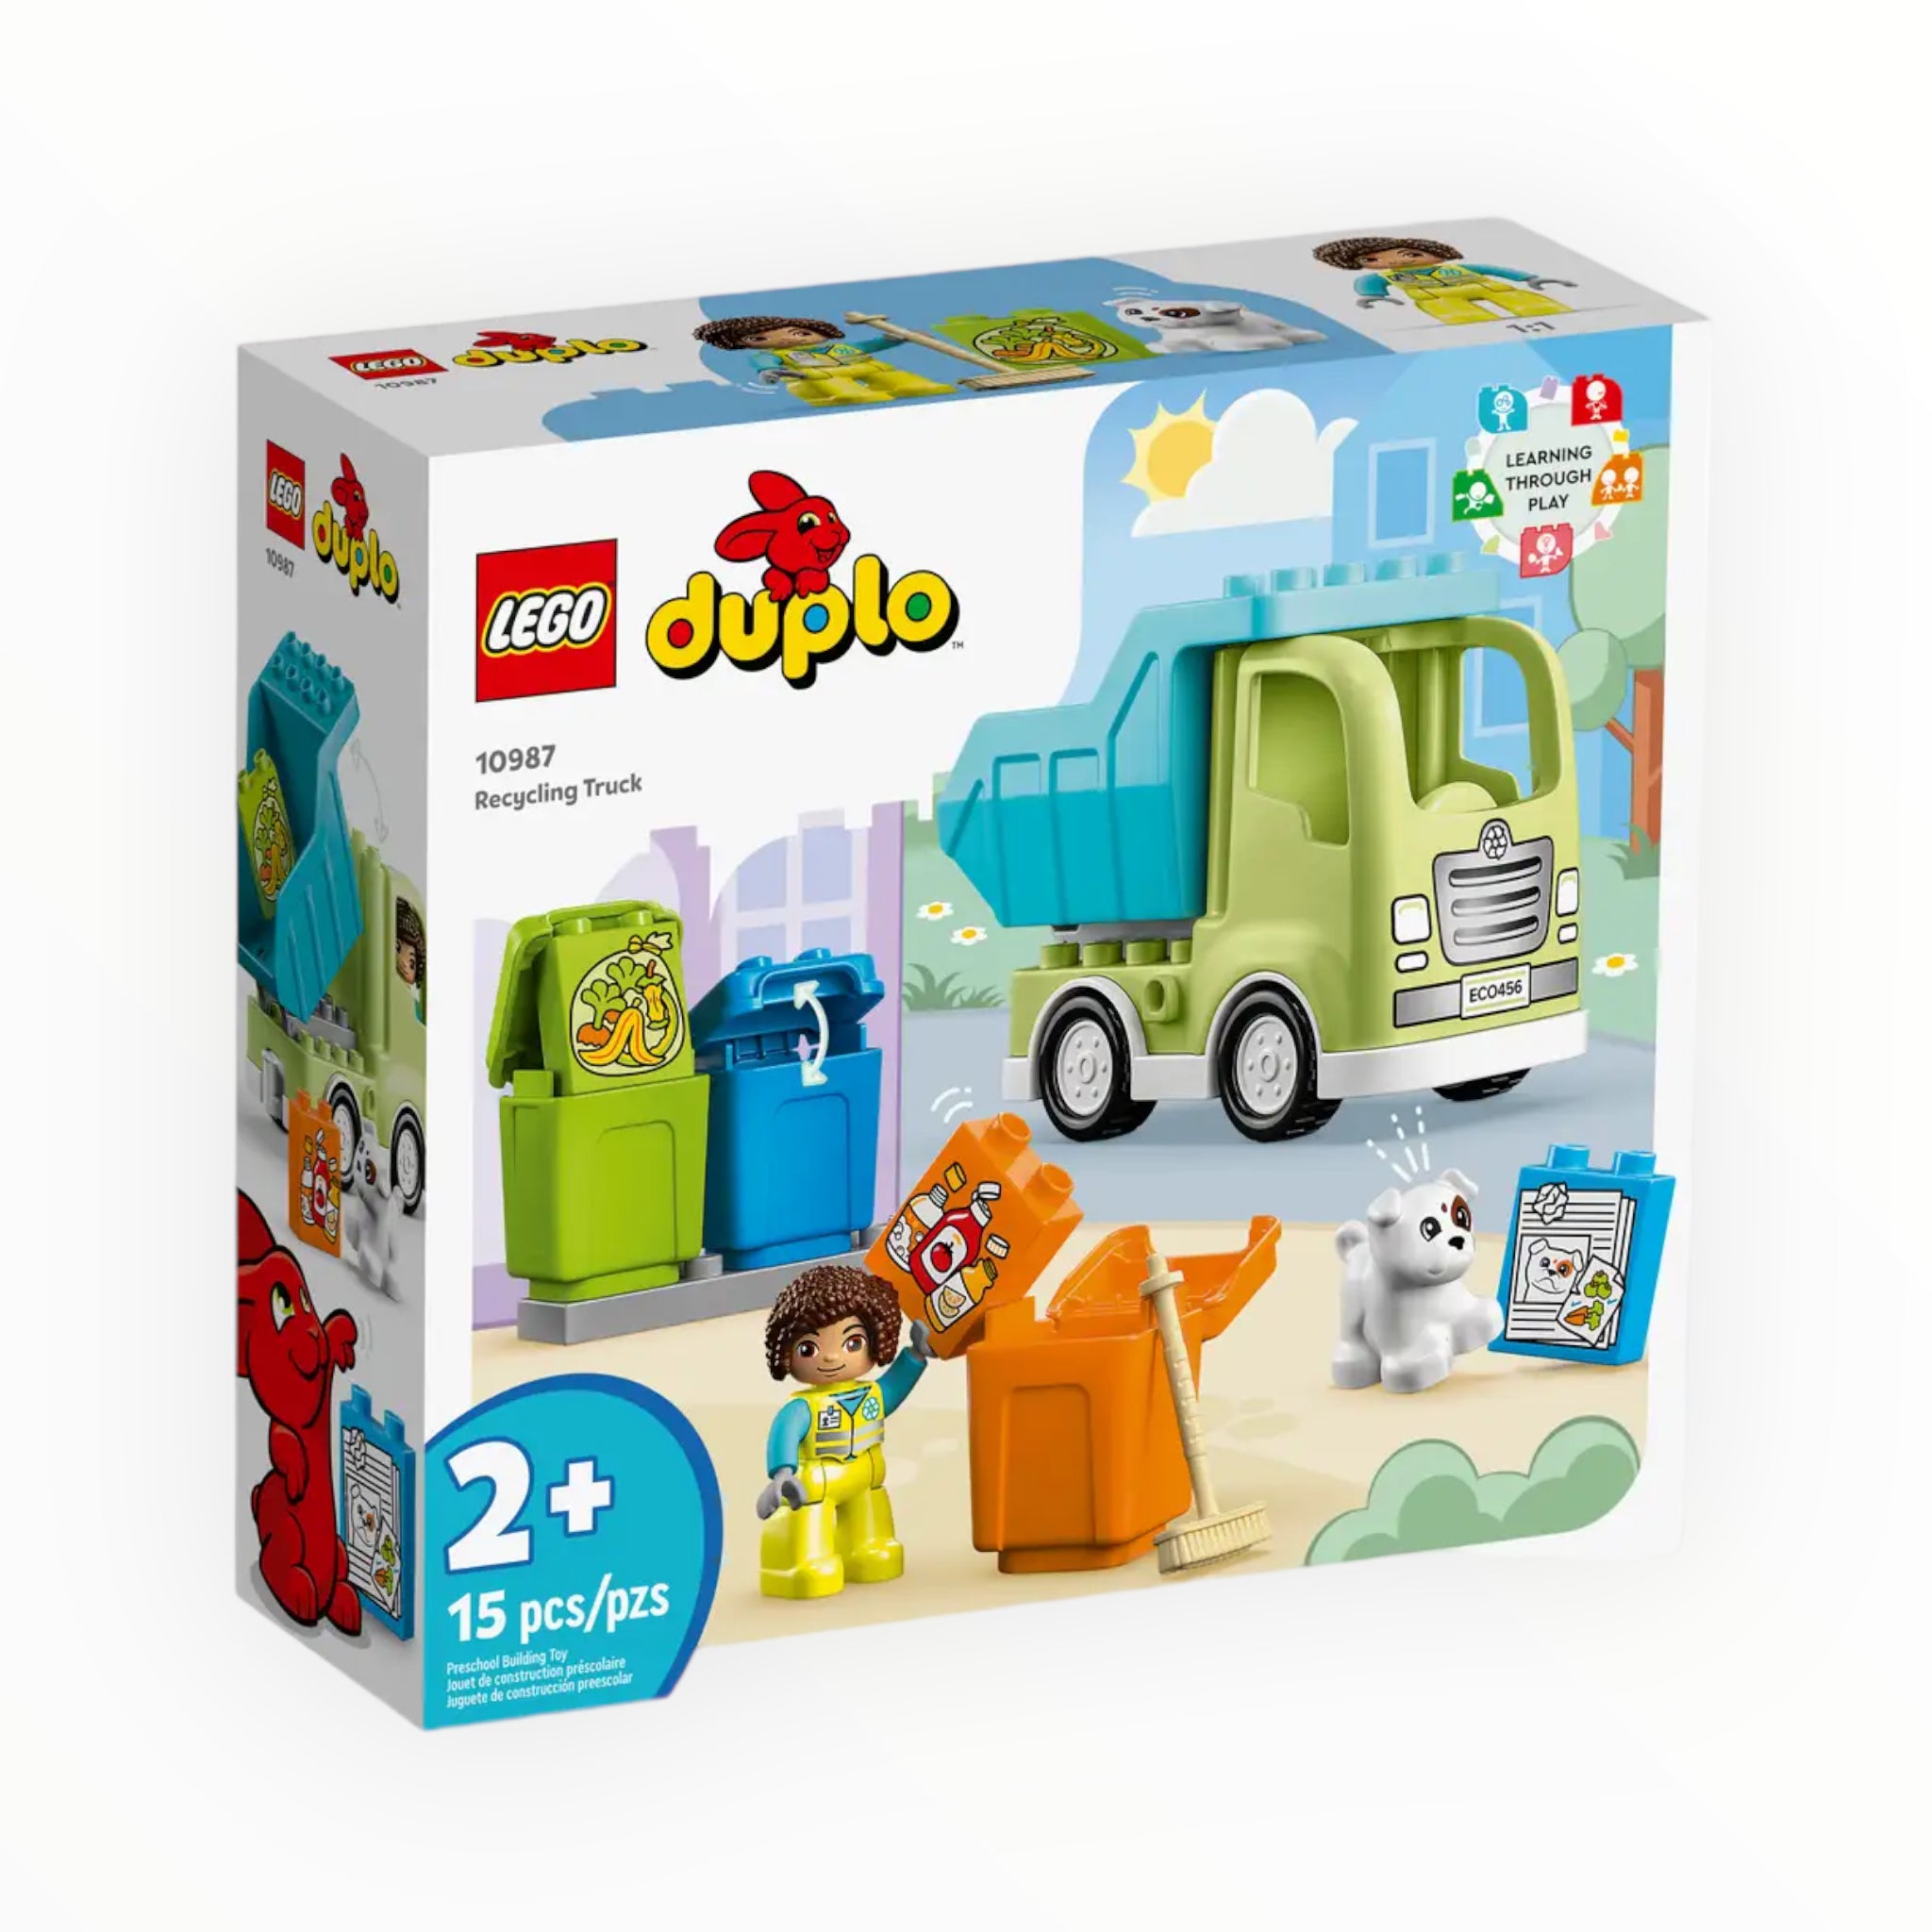 10987 DUPLO Recycling Truck